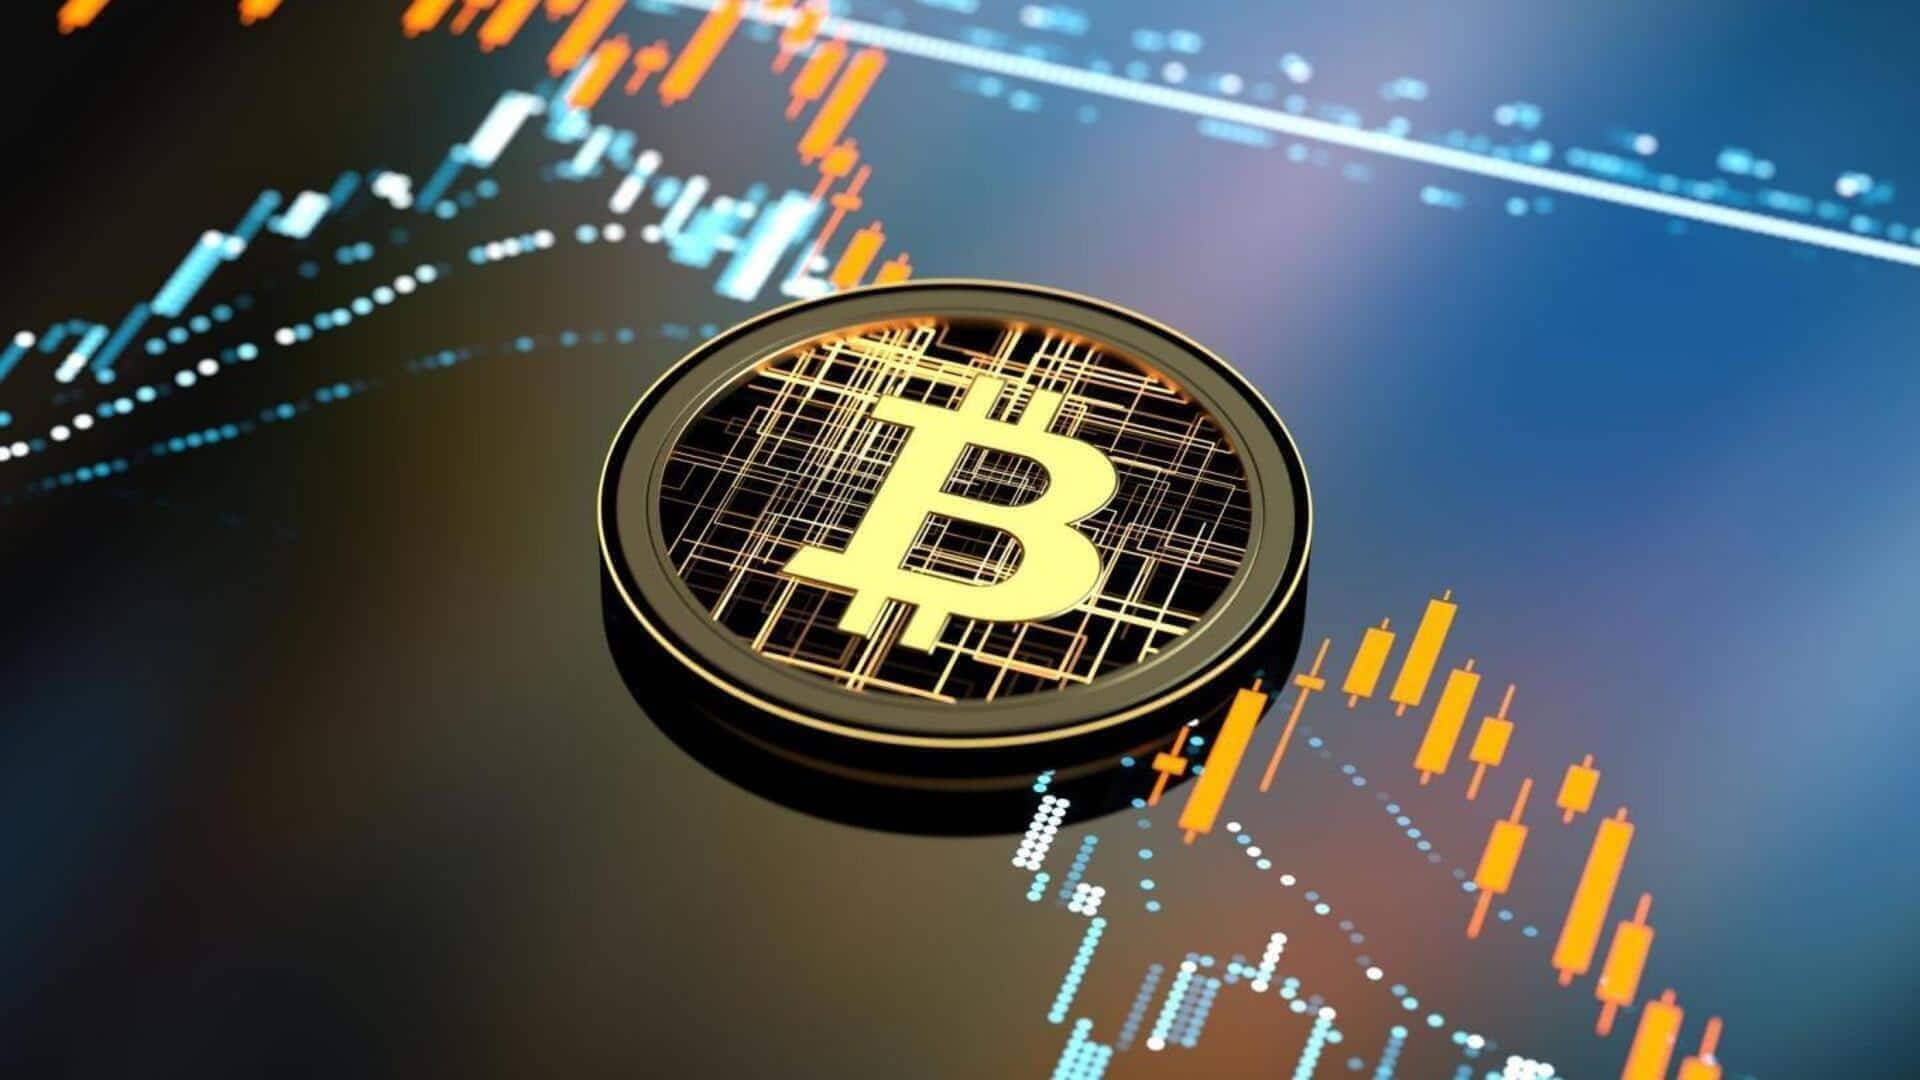 Bitcoin surpasses $60,000 mark for first time since November 2021